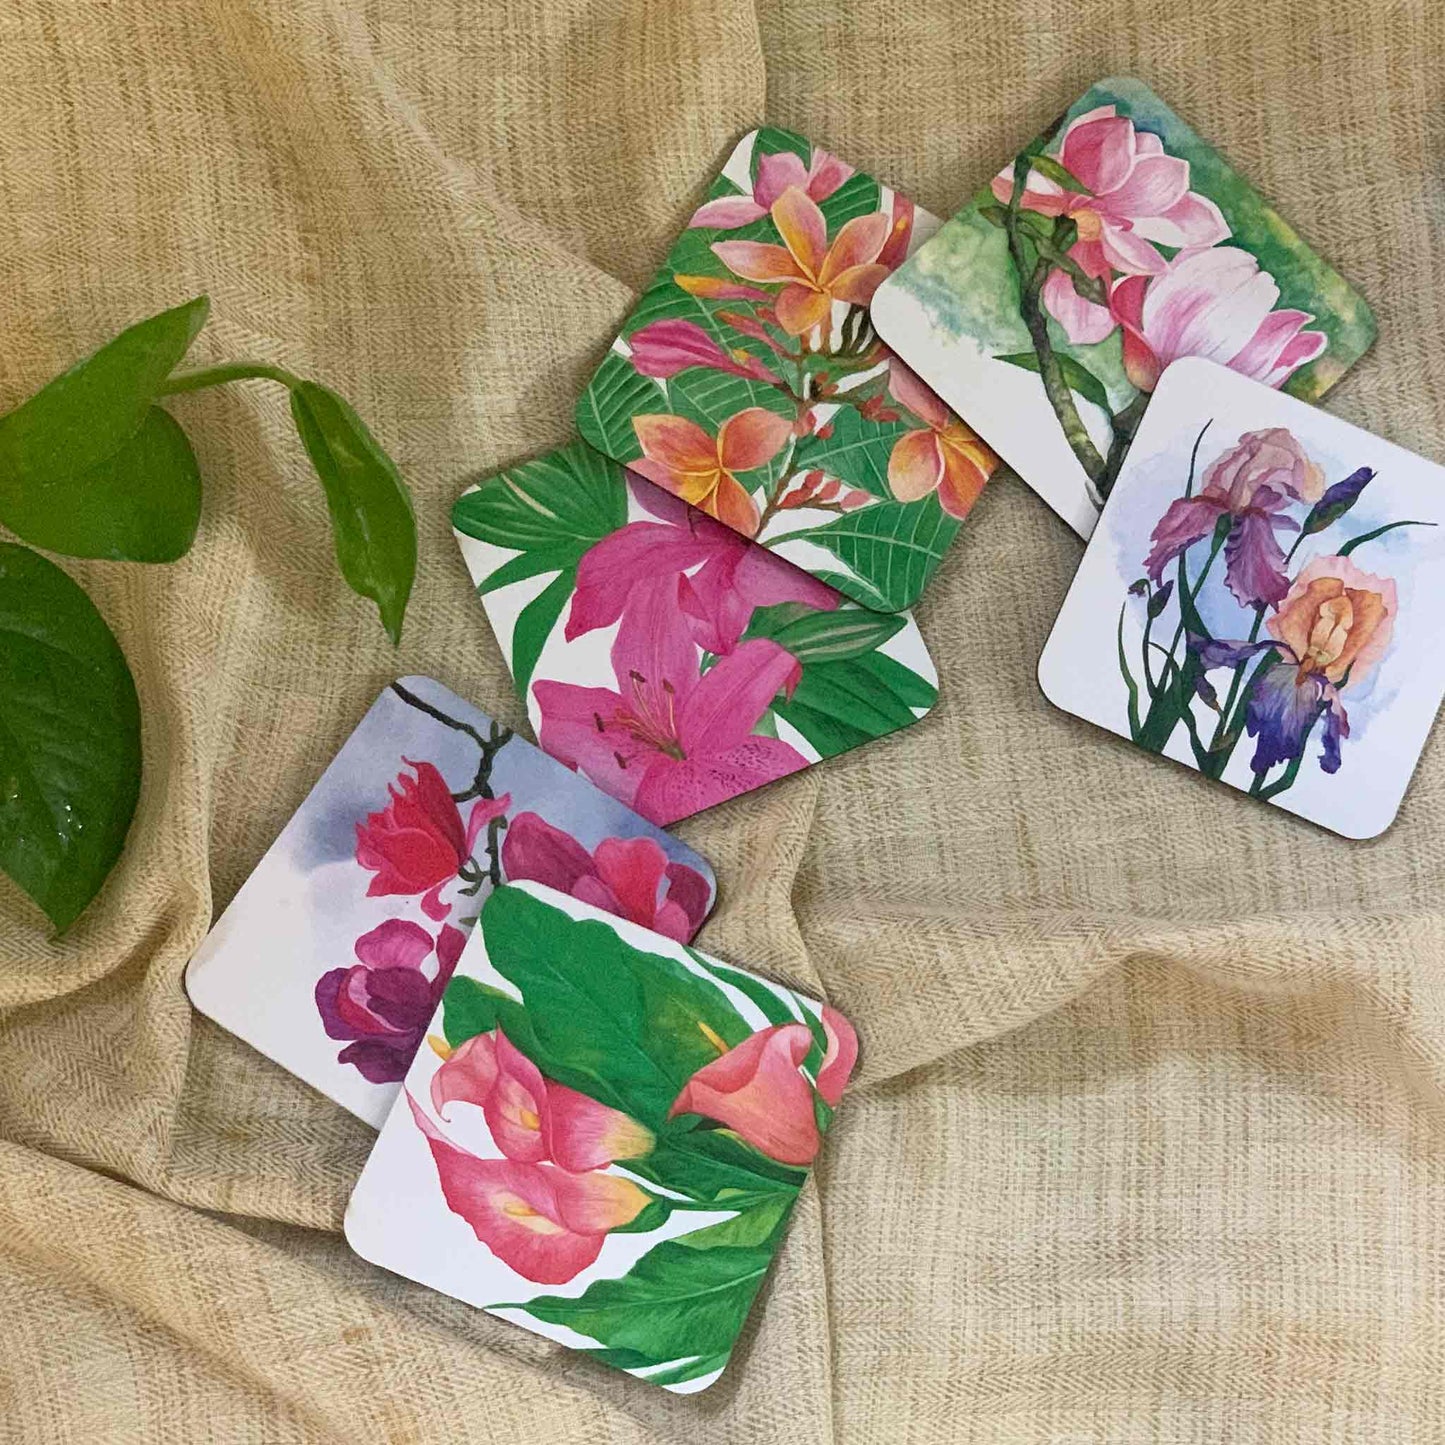 Studio Decorai Coasters It's all about Pink - Floral Coasters (Set of 6)